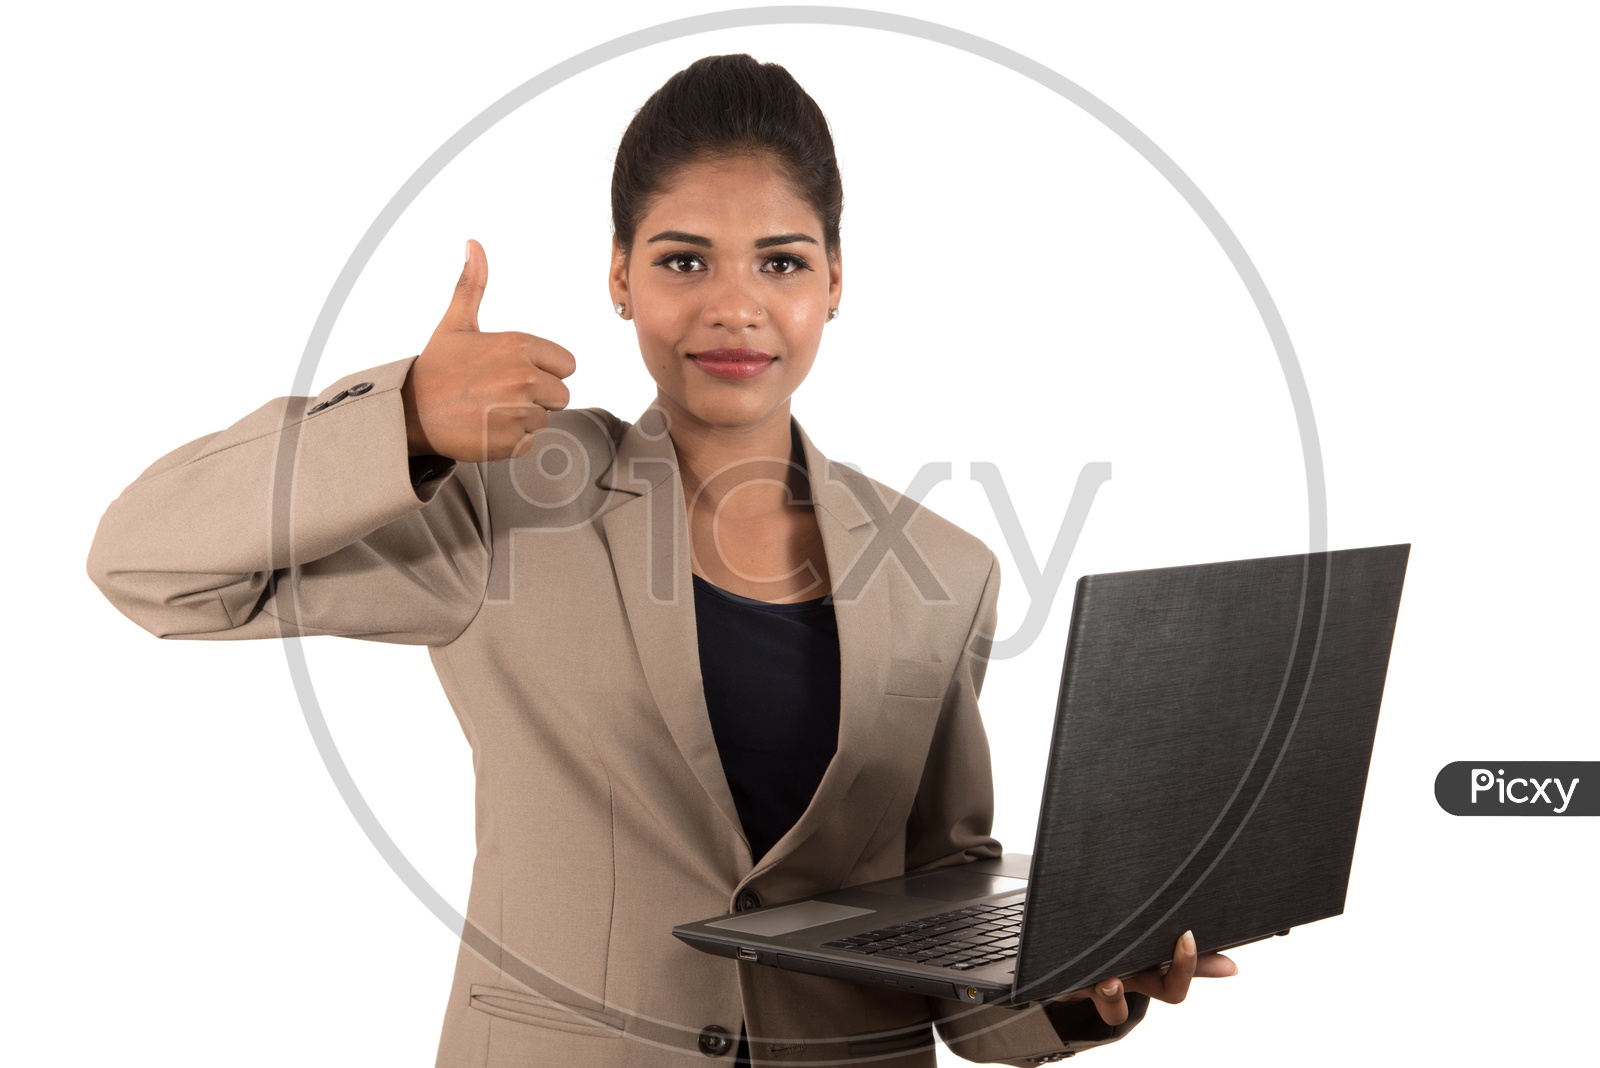 Young Indian business woman holding a laptop giving thumbs up